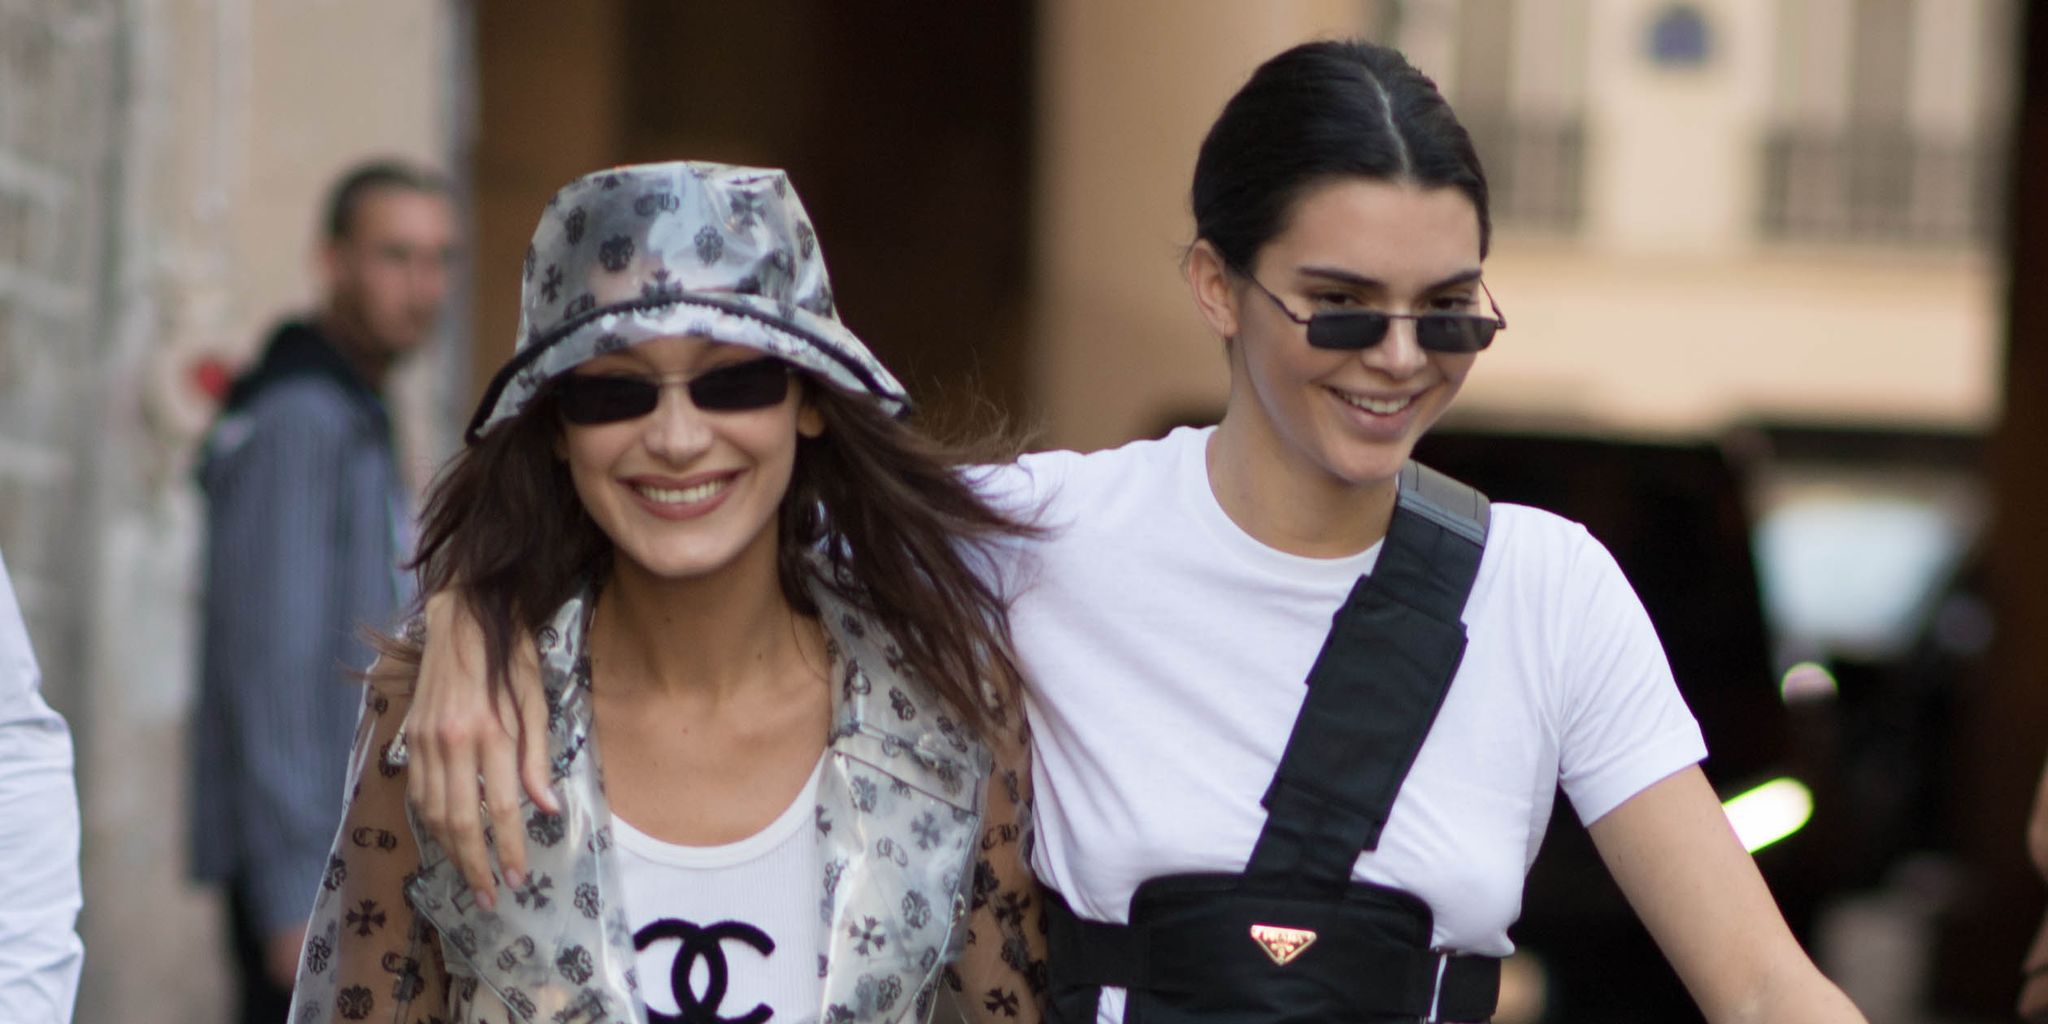 Kendall Jenner Shiny Black Purse With Braless Red Top for Bella Hadid's  Birthday Party 2018